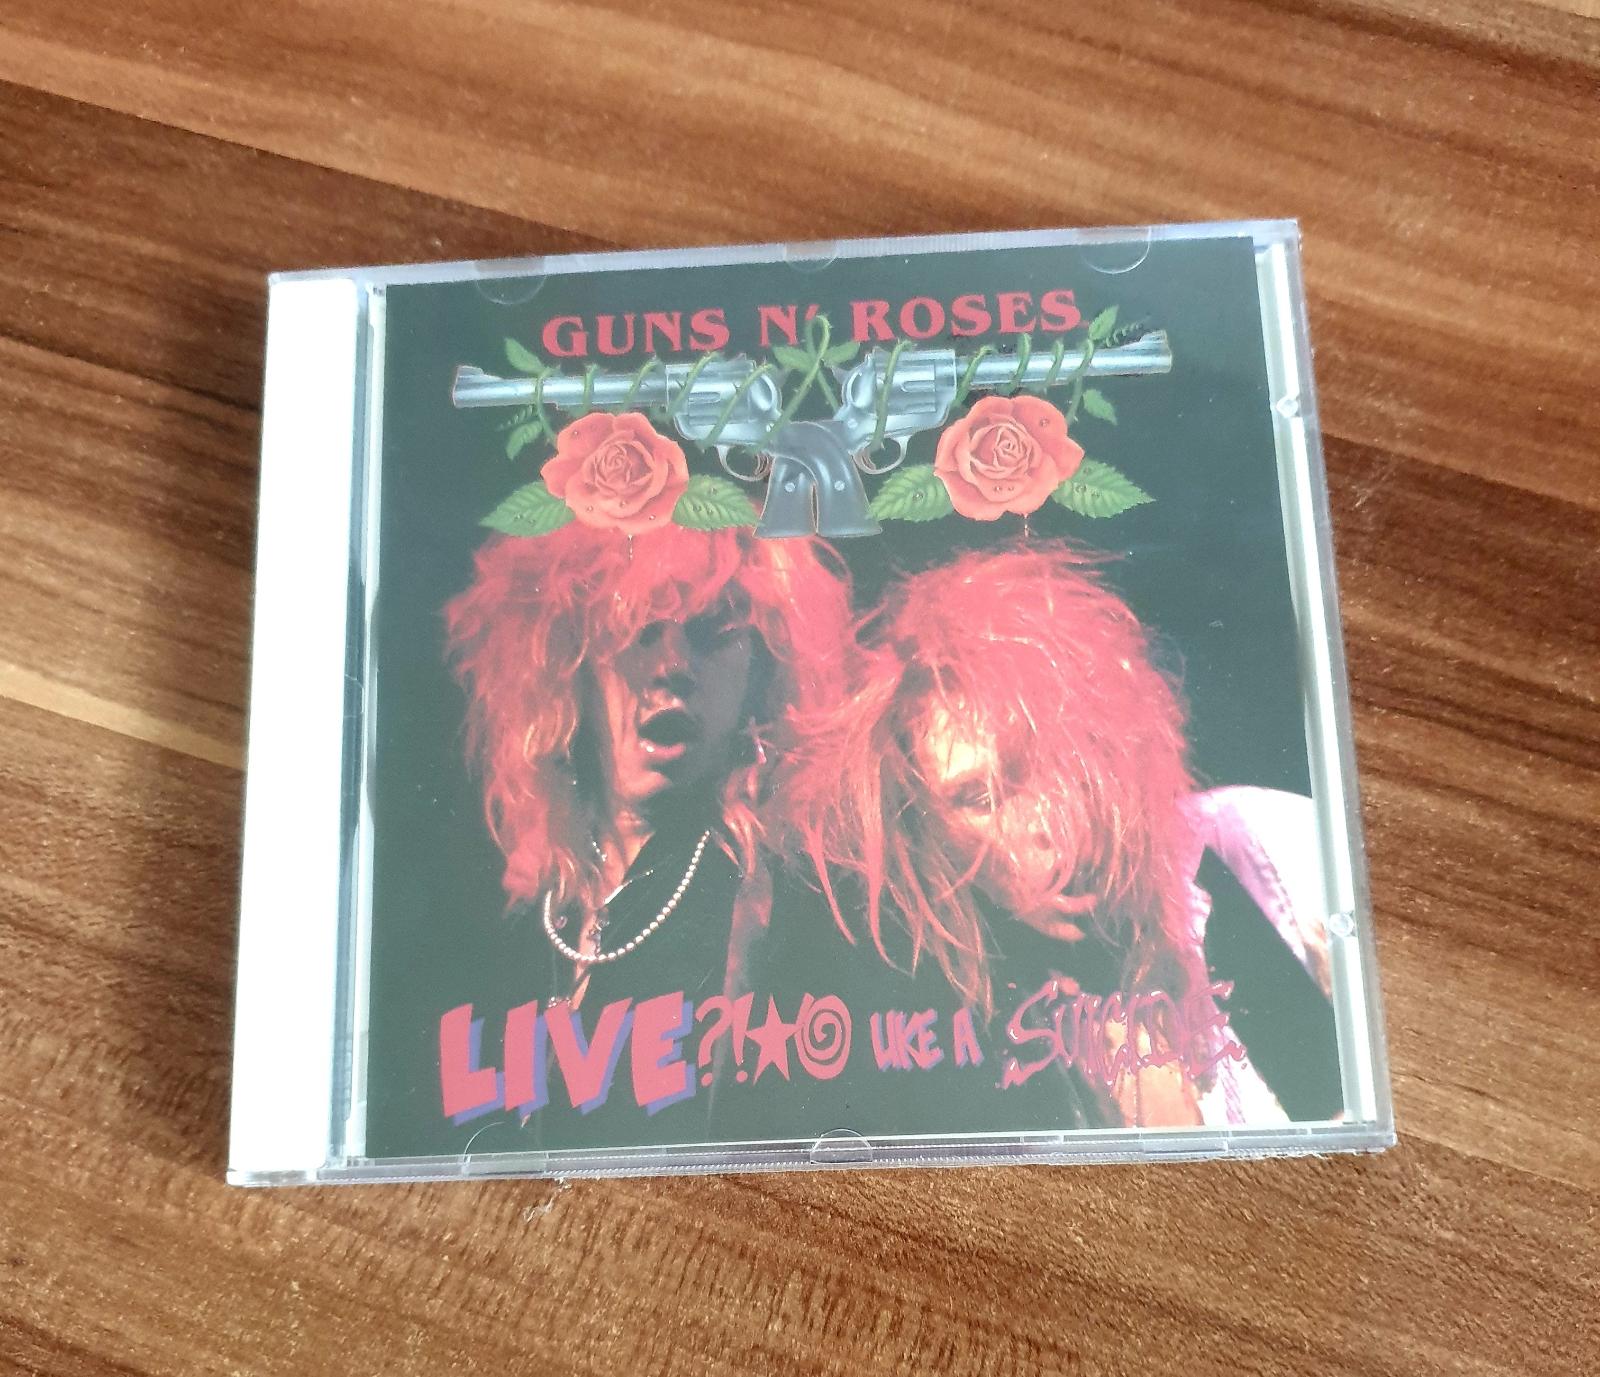 CD Guns N Roses - Live - Like a Suicide Popron | Aukro